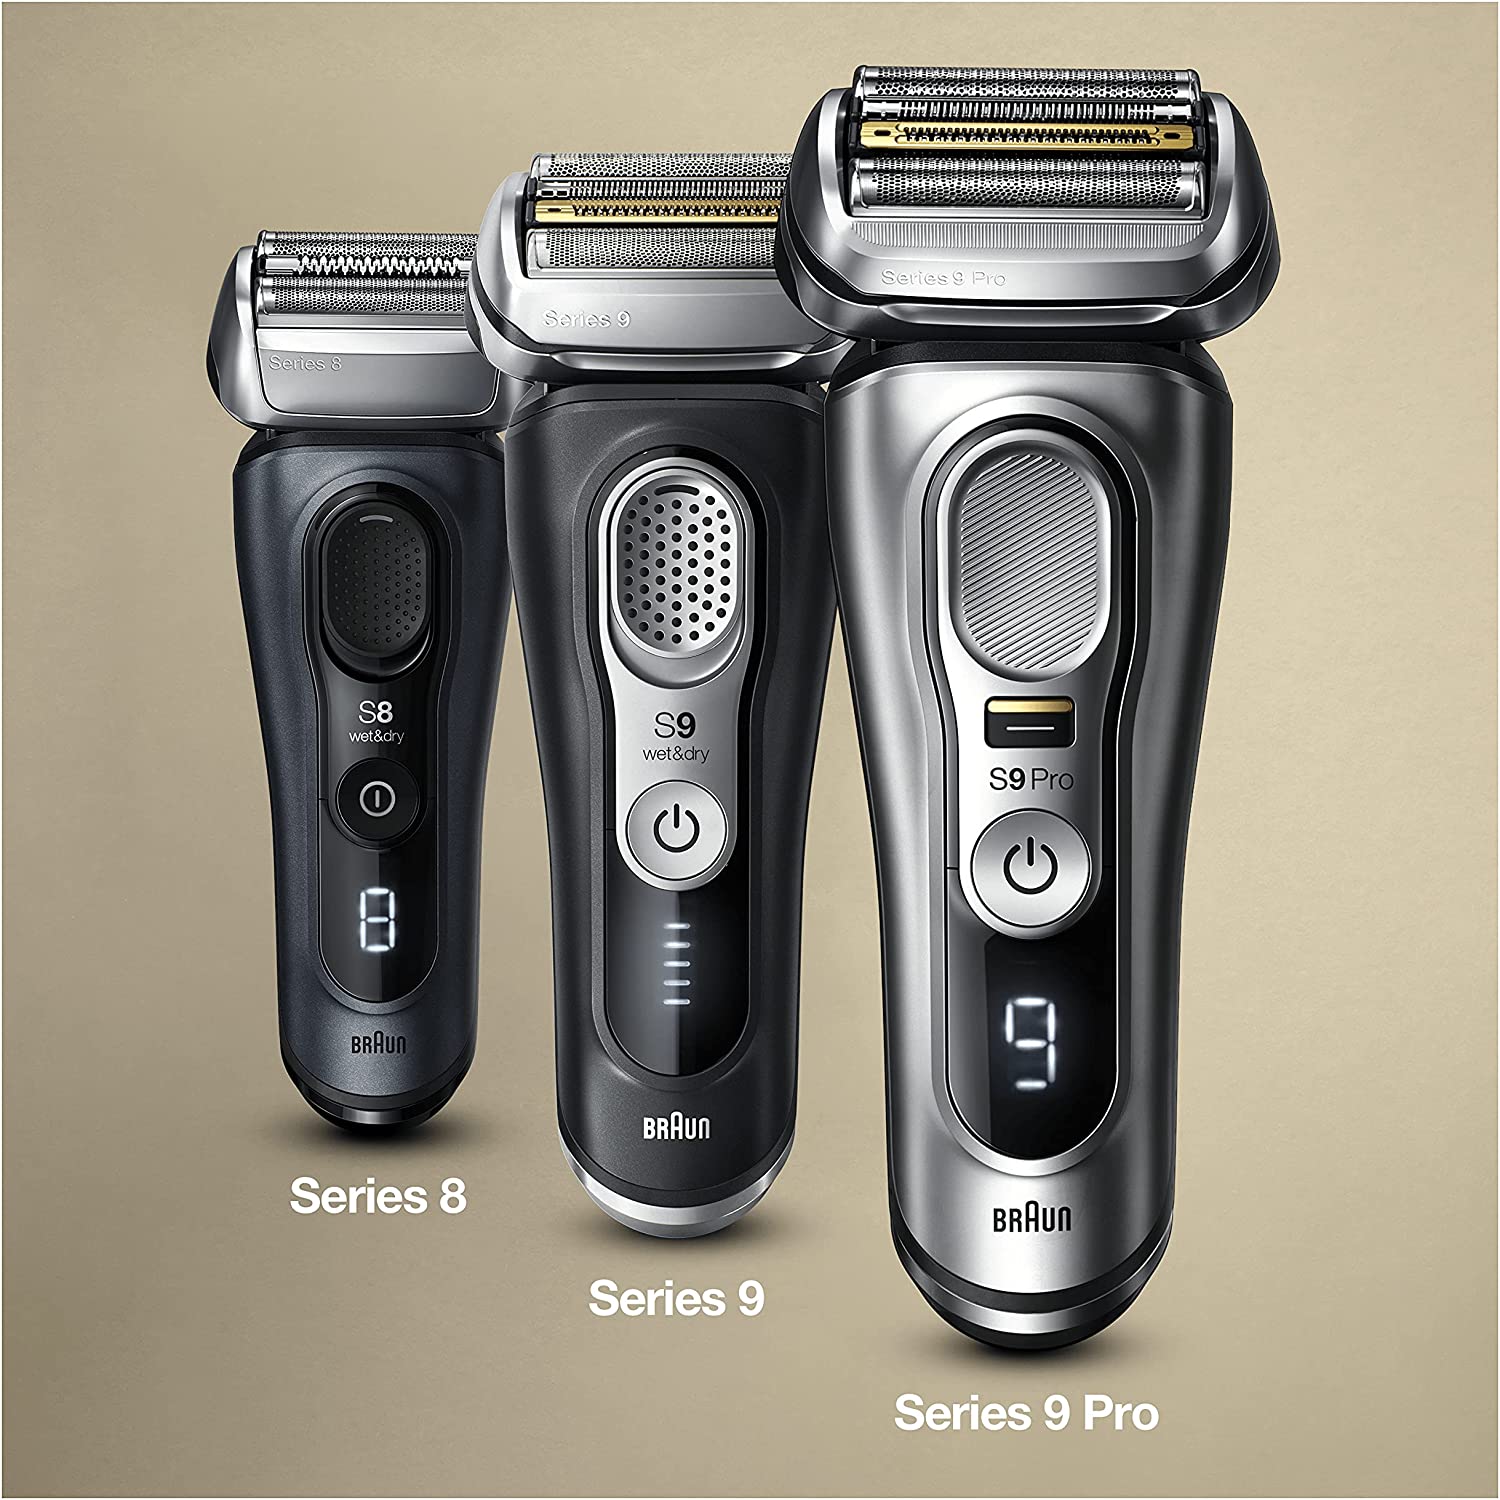 Braun 5-in-1 SmartCare Unit Compatible with Braun Series 9 and Series 8 - Healthxpress.ie